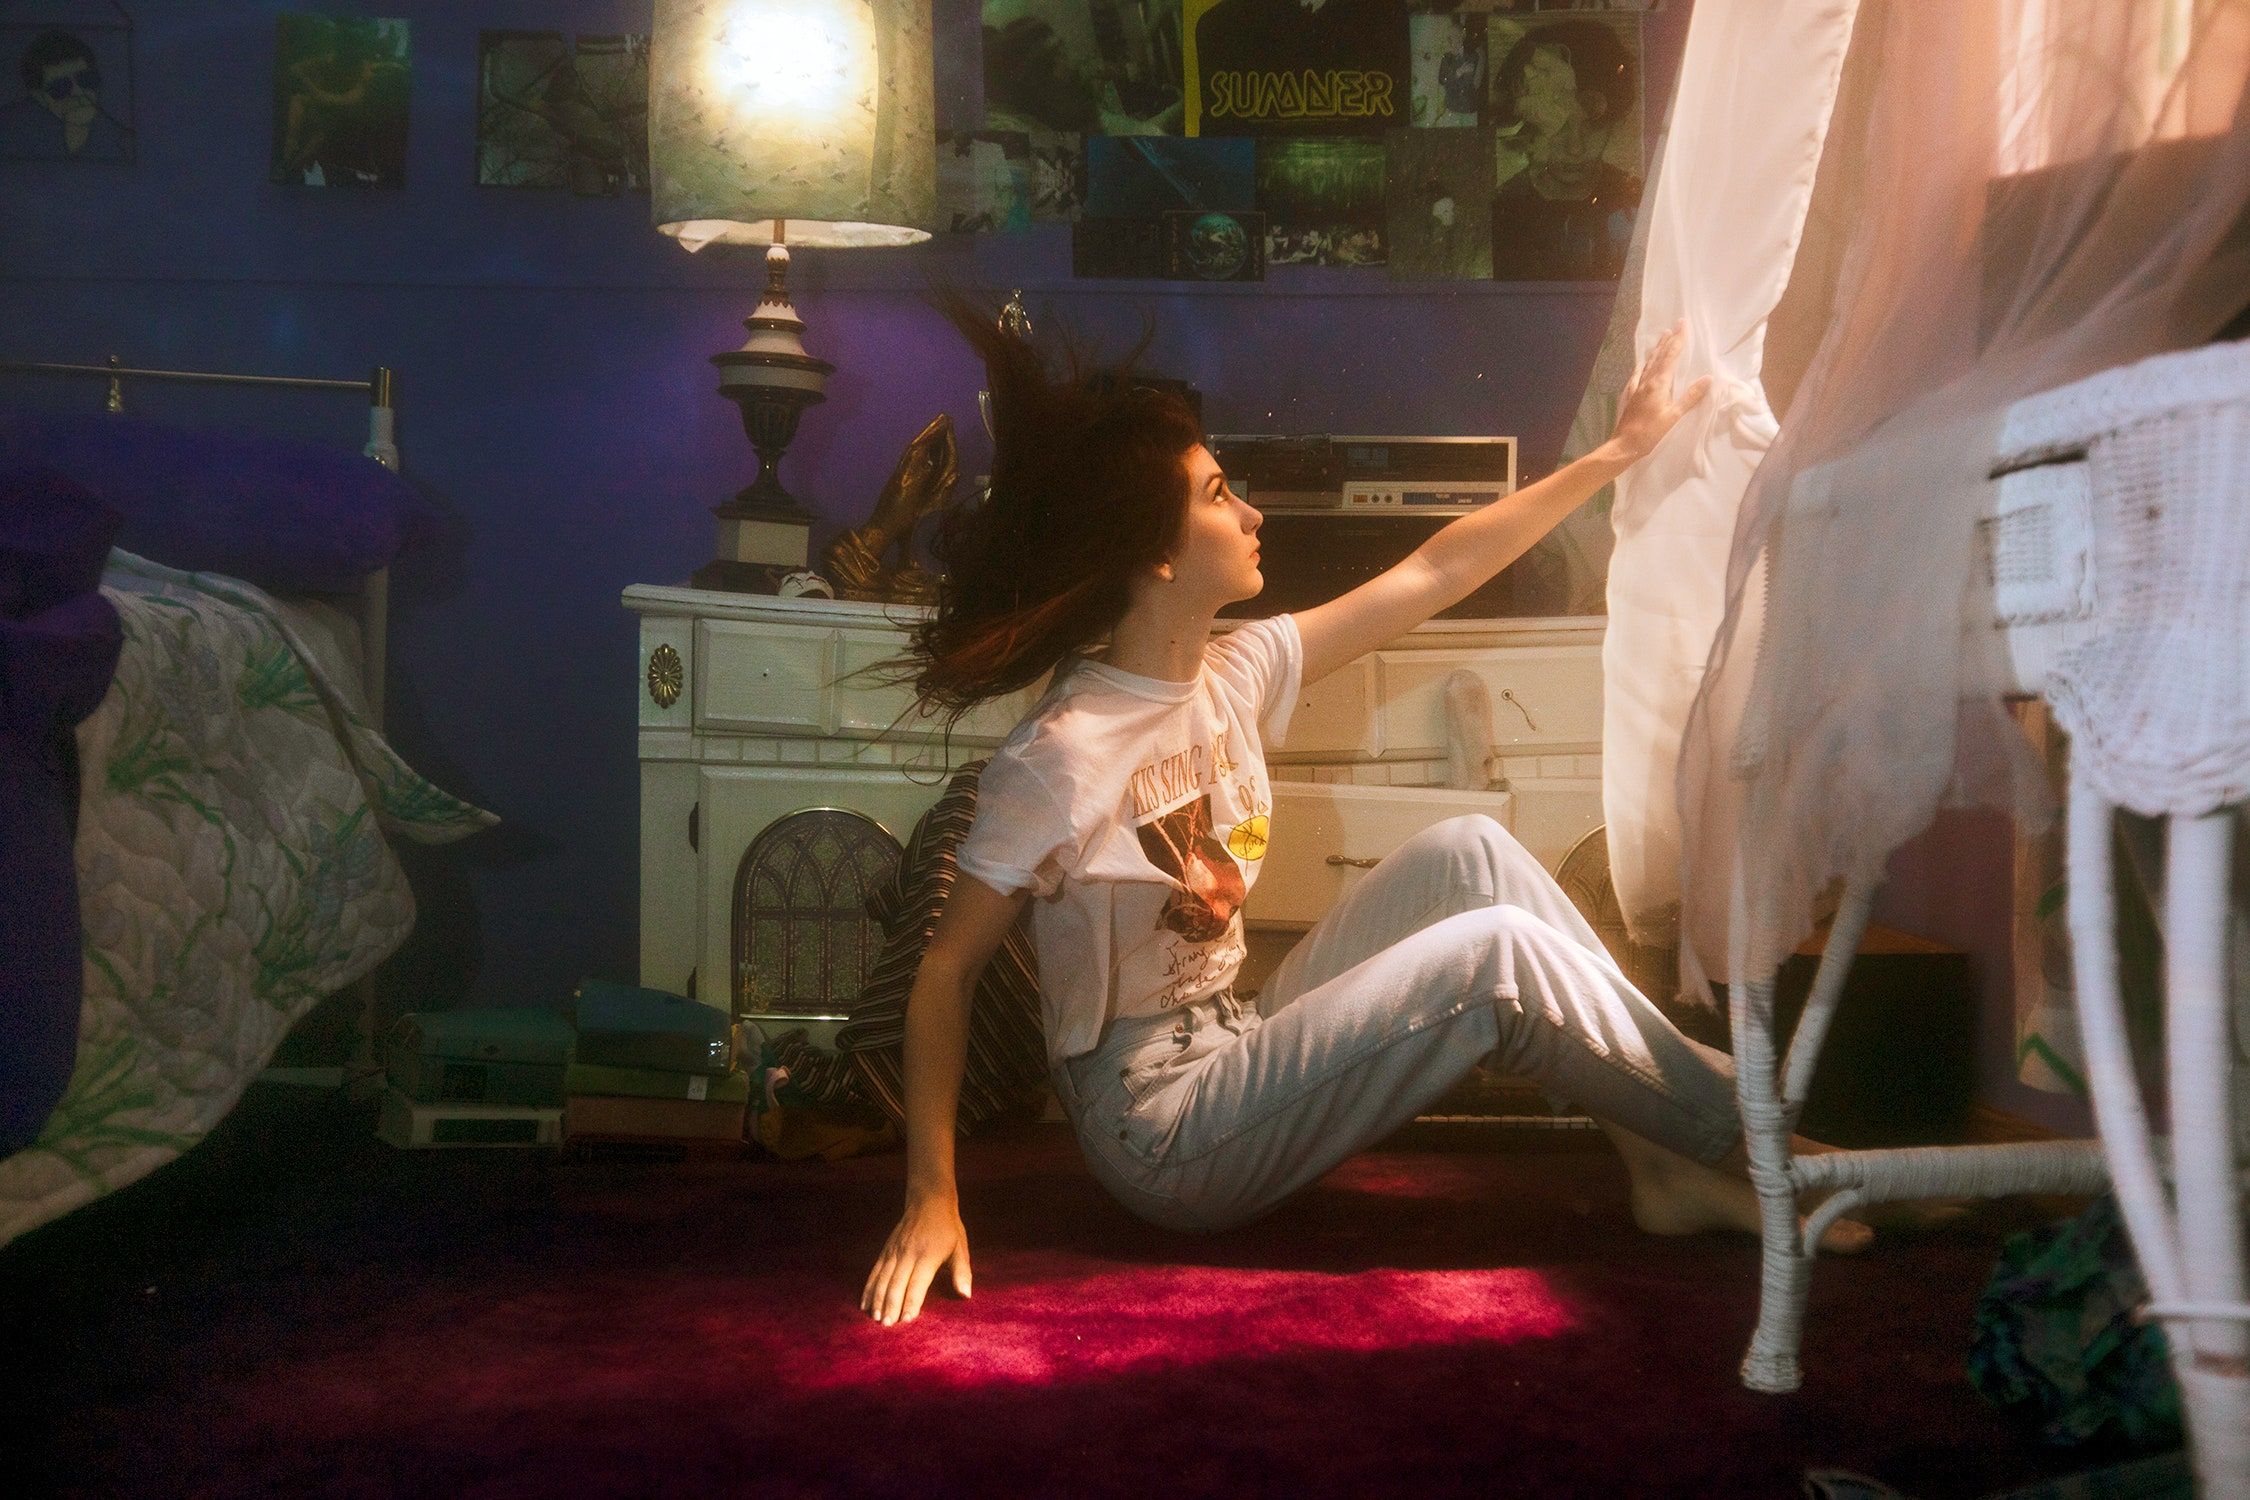 Weyes Blood's “Titanic Rising” Is a Lush, Grieving Soundtrack to Climate Change. The New Yorker